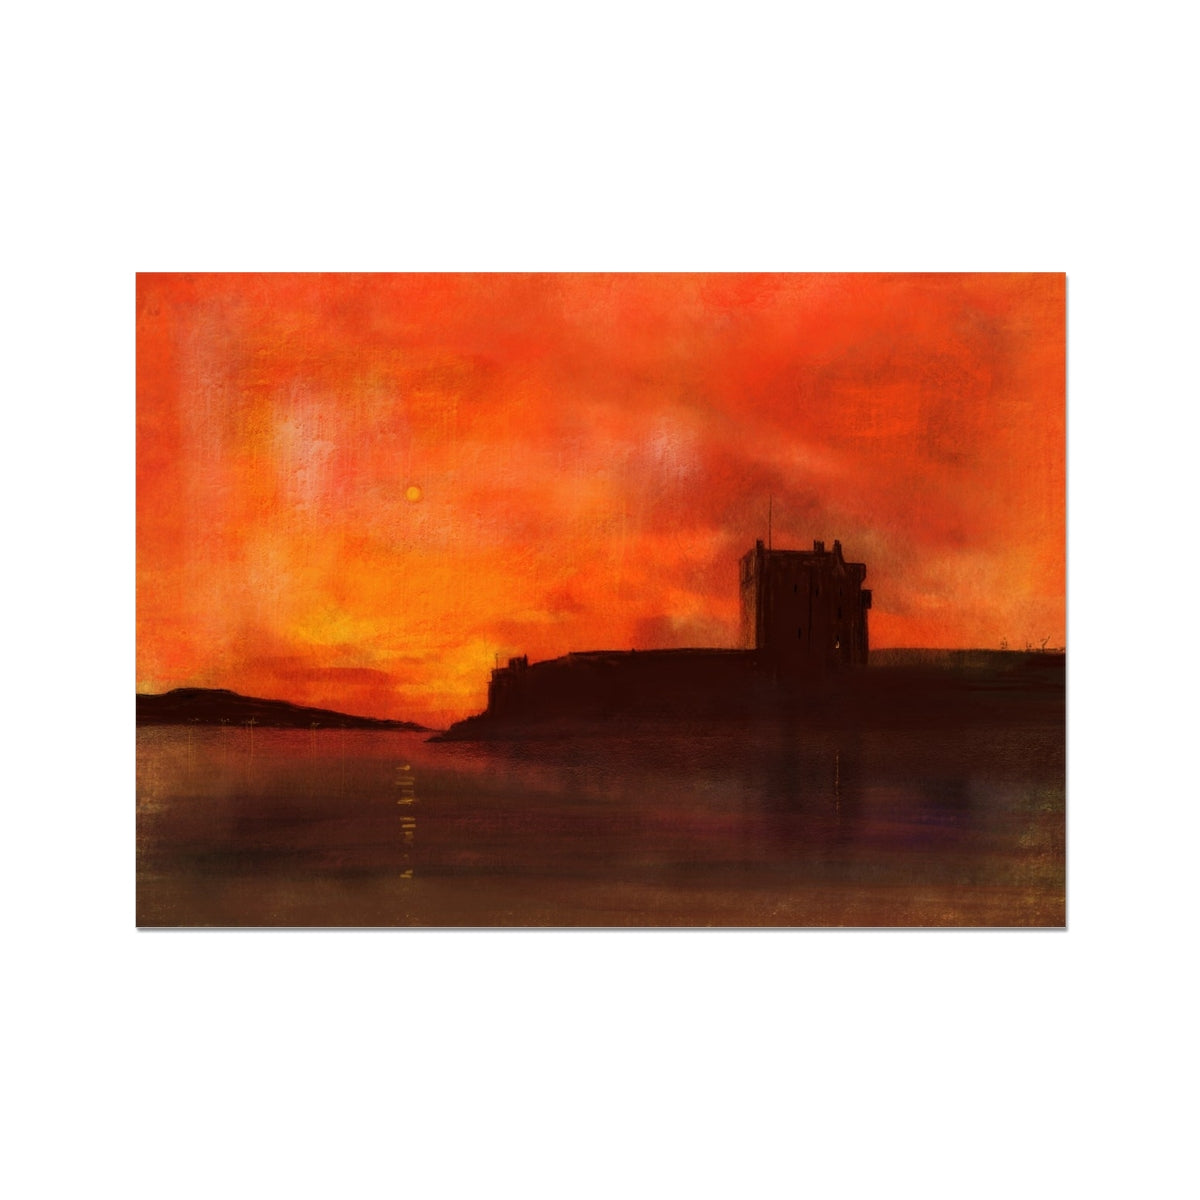 Broughty Castle Sunset Painting | Fine Art Prints From Scotland-Unframed Prints-Historic & Iconic Scotland Art Gallery-A2 Landscape-Paintings, Prints, Homeware, Art Gifts From Scotland By Scottish Artist Kevin Hunter